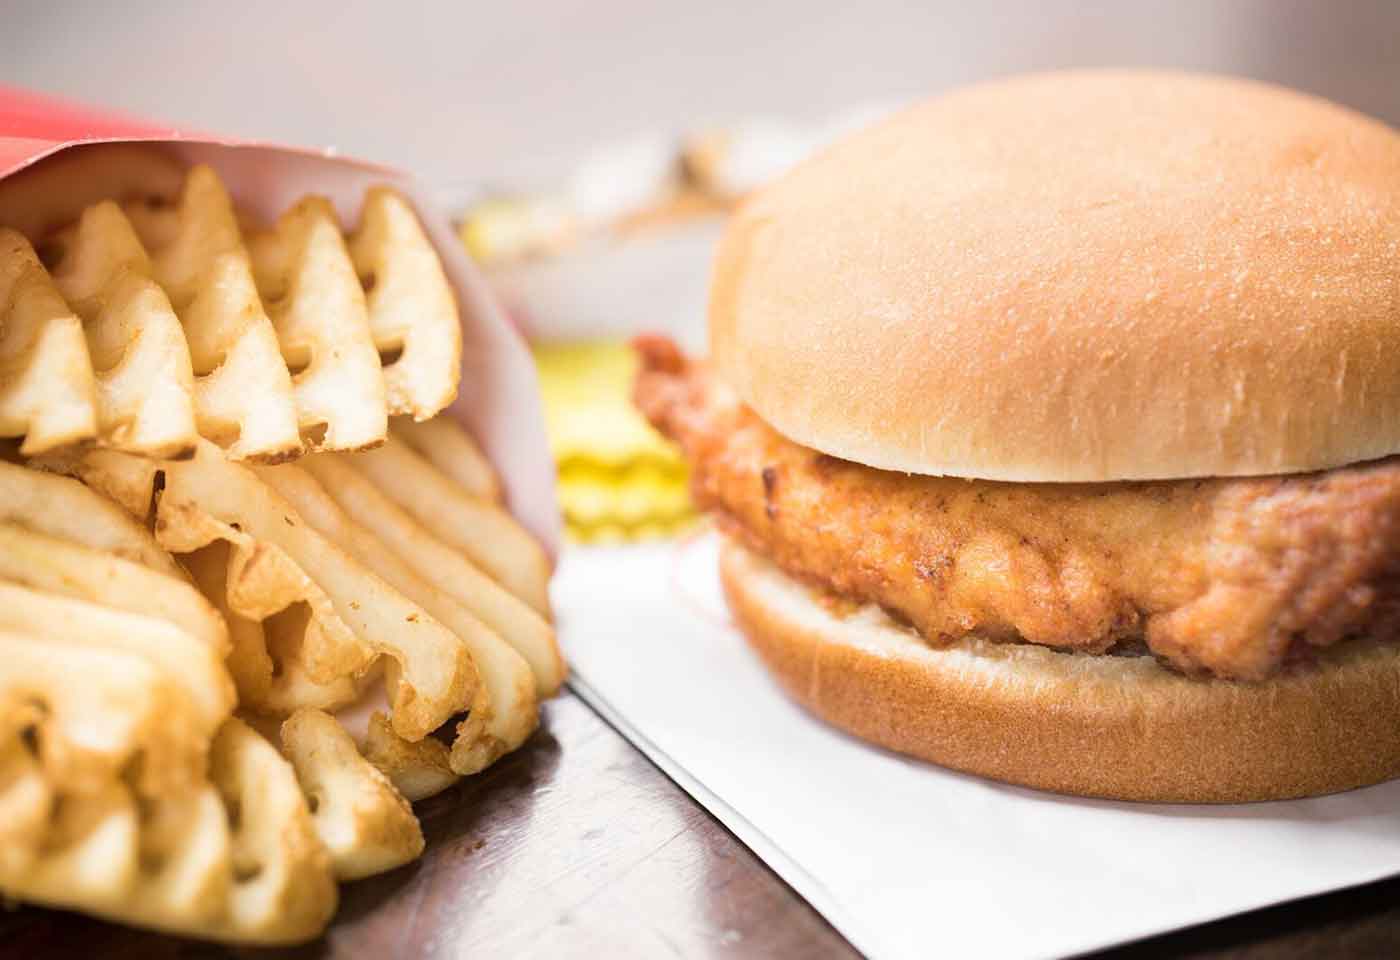 Chick-Fil-A in Redwood City offers graduates free sandwich this week